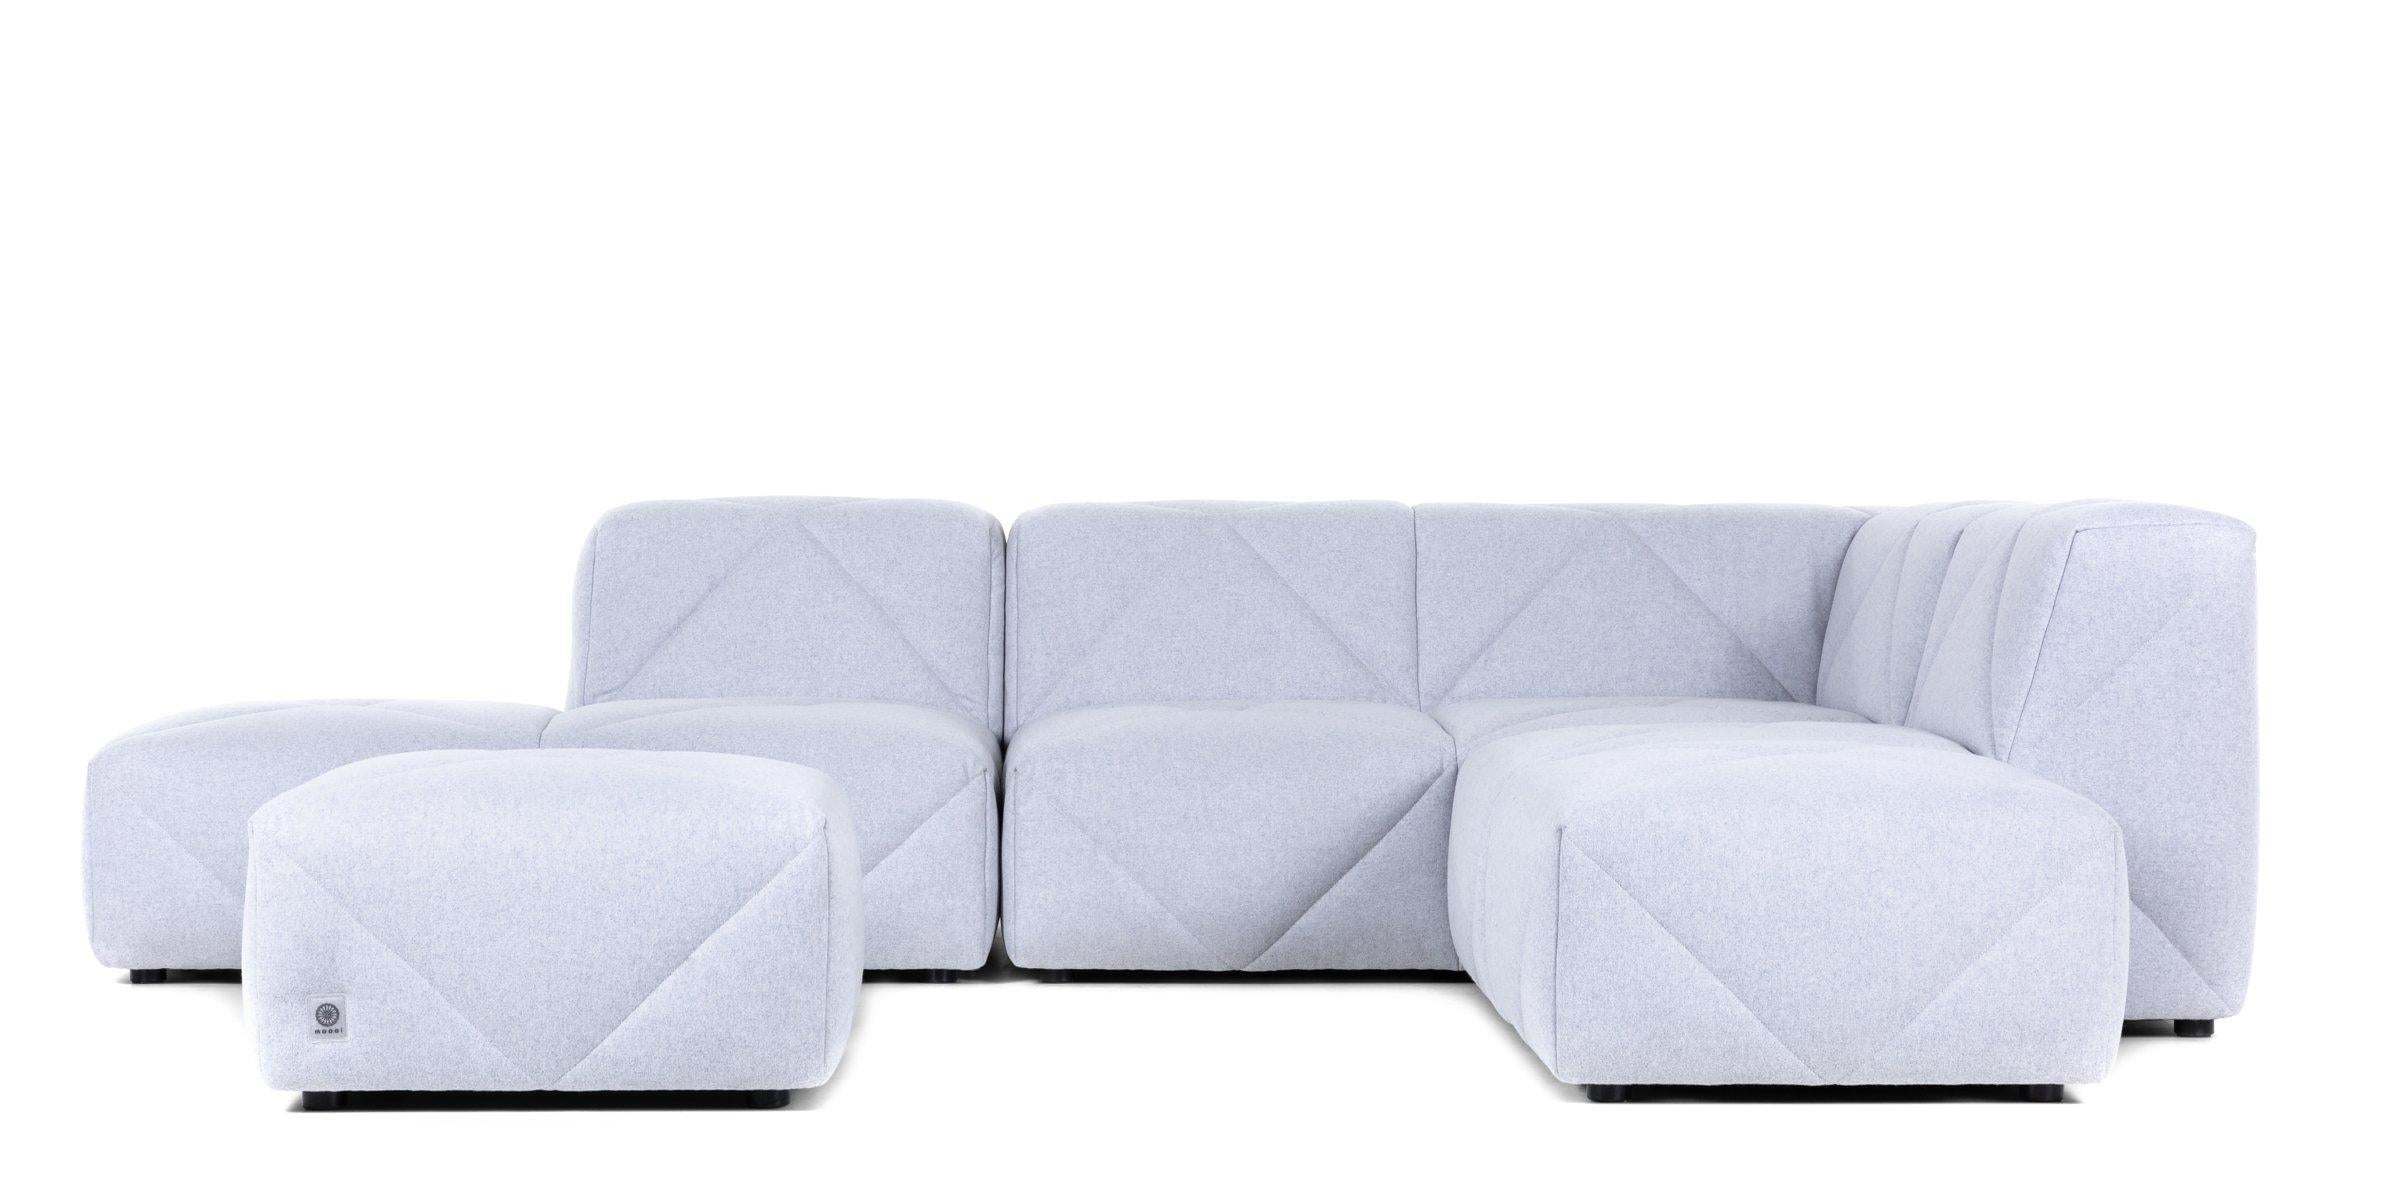 The award-winning BFF Sofa by Marcel Wanders is everyone's new best friend! A high quality, soft yet firm modular sofa system, consisting of a wide variety of modules for endless configurations. A modular sofa system that will befriend any interior.